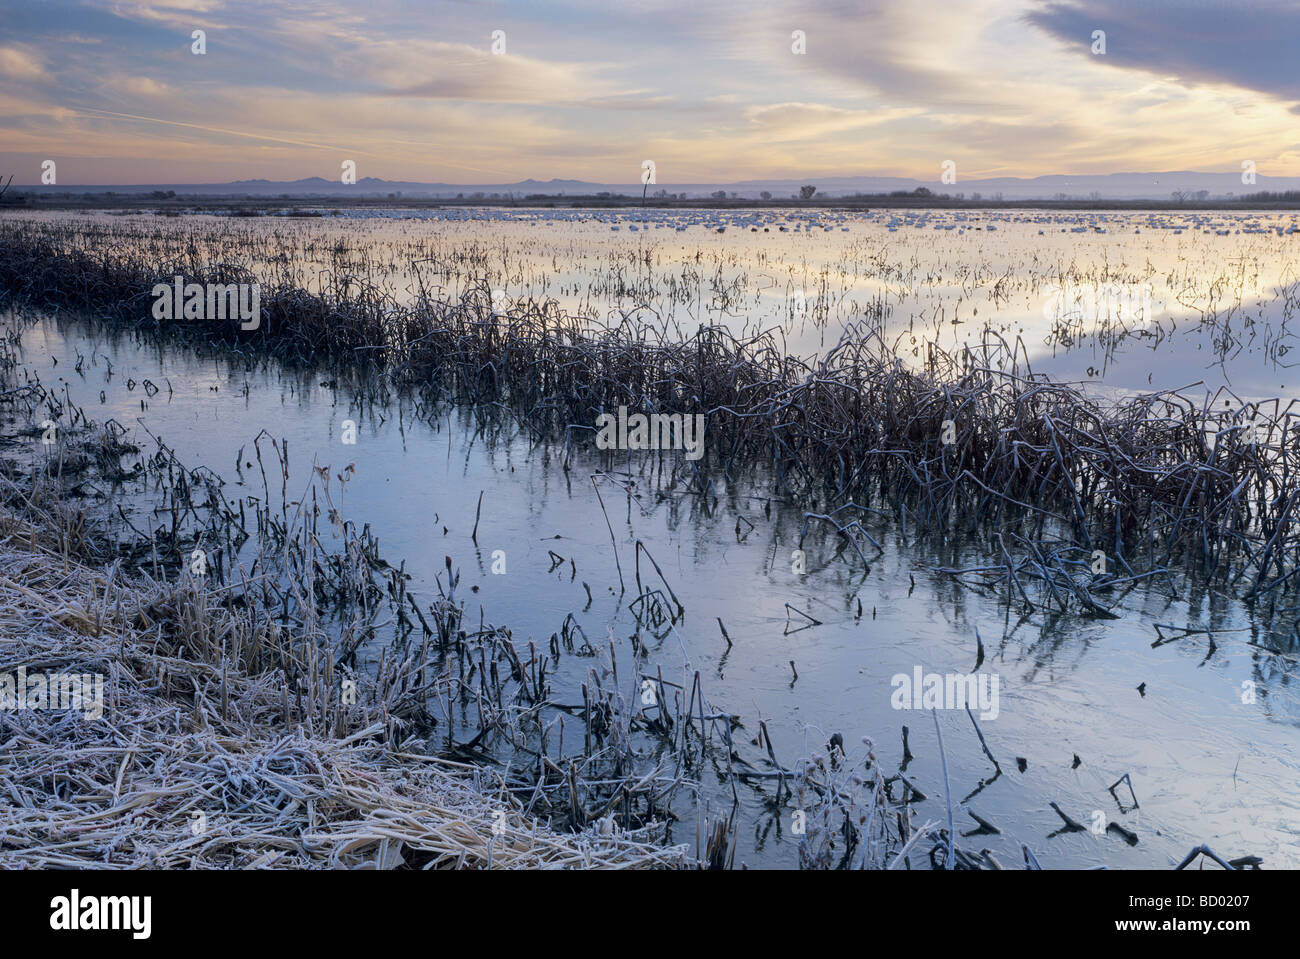 Sunrise over Wetland with snow geese Bosque del Apache National Wildlife Refuge Socorro New Mexico USA  Stock Photo